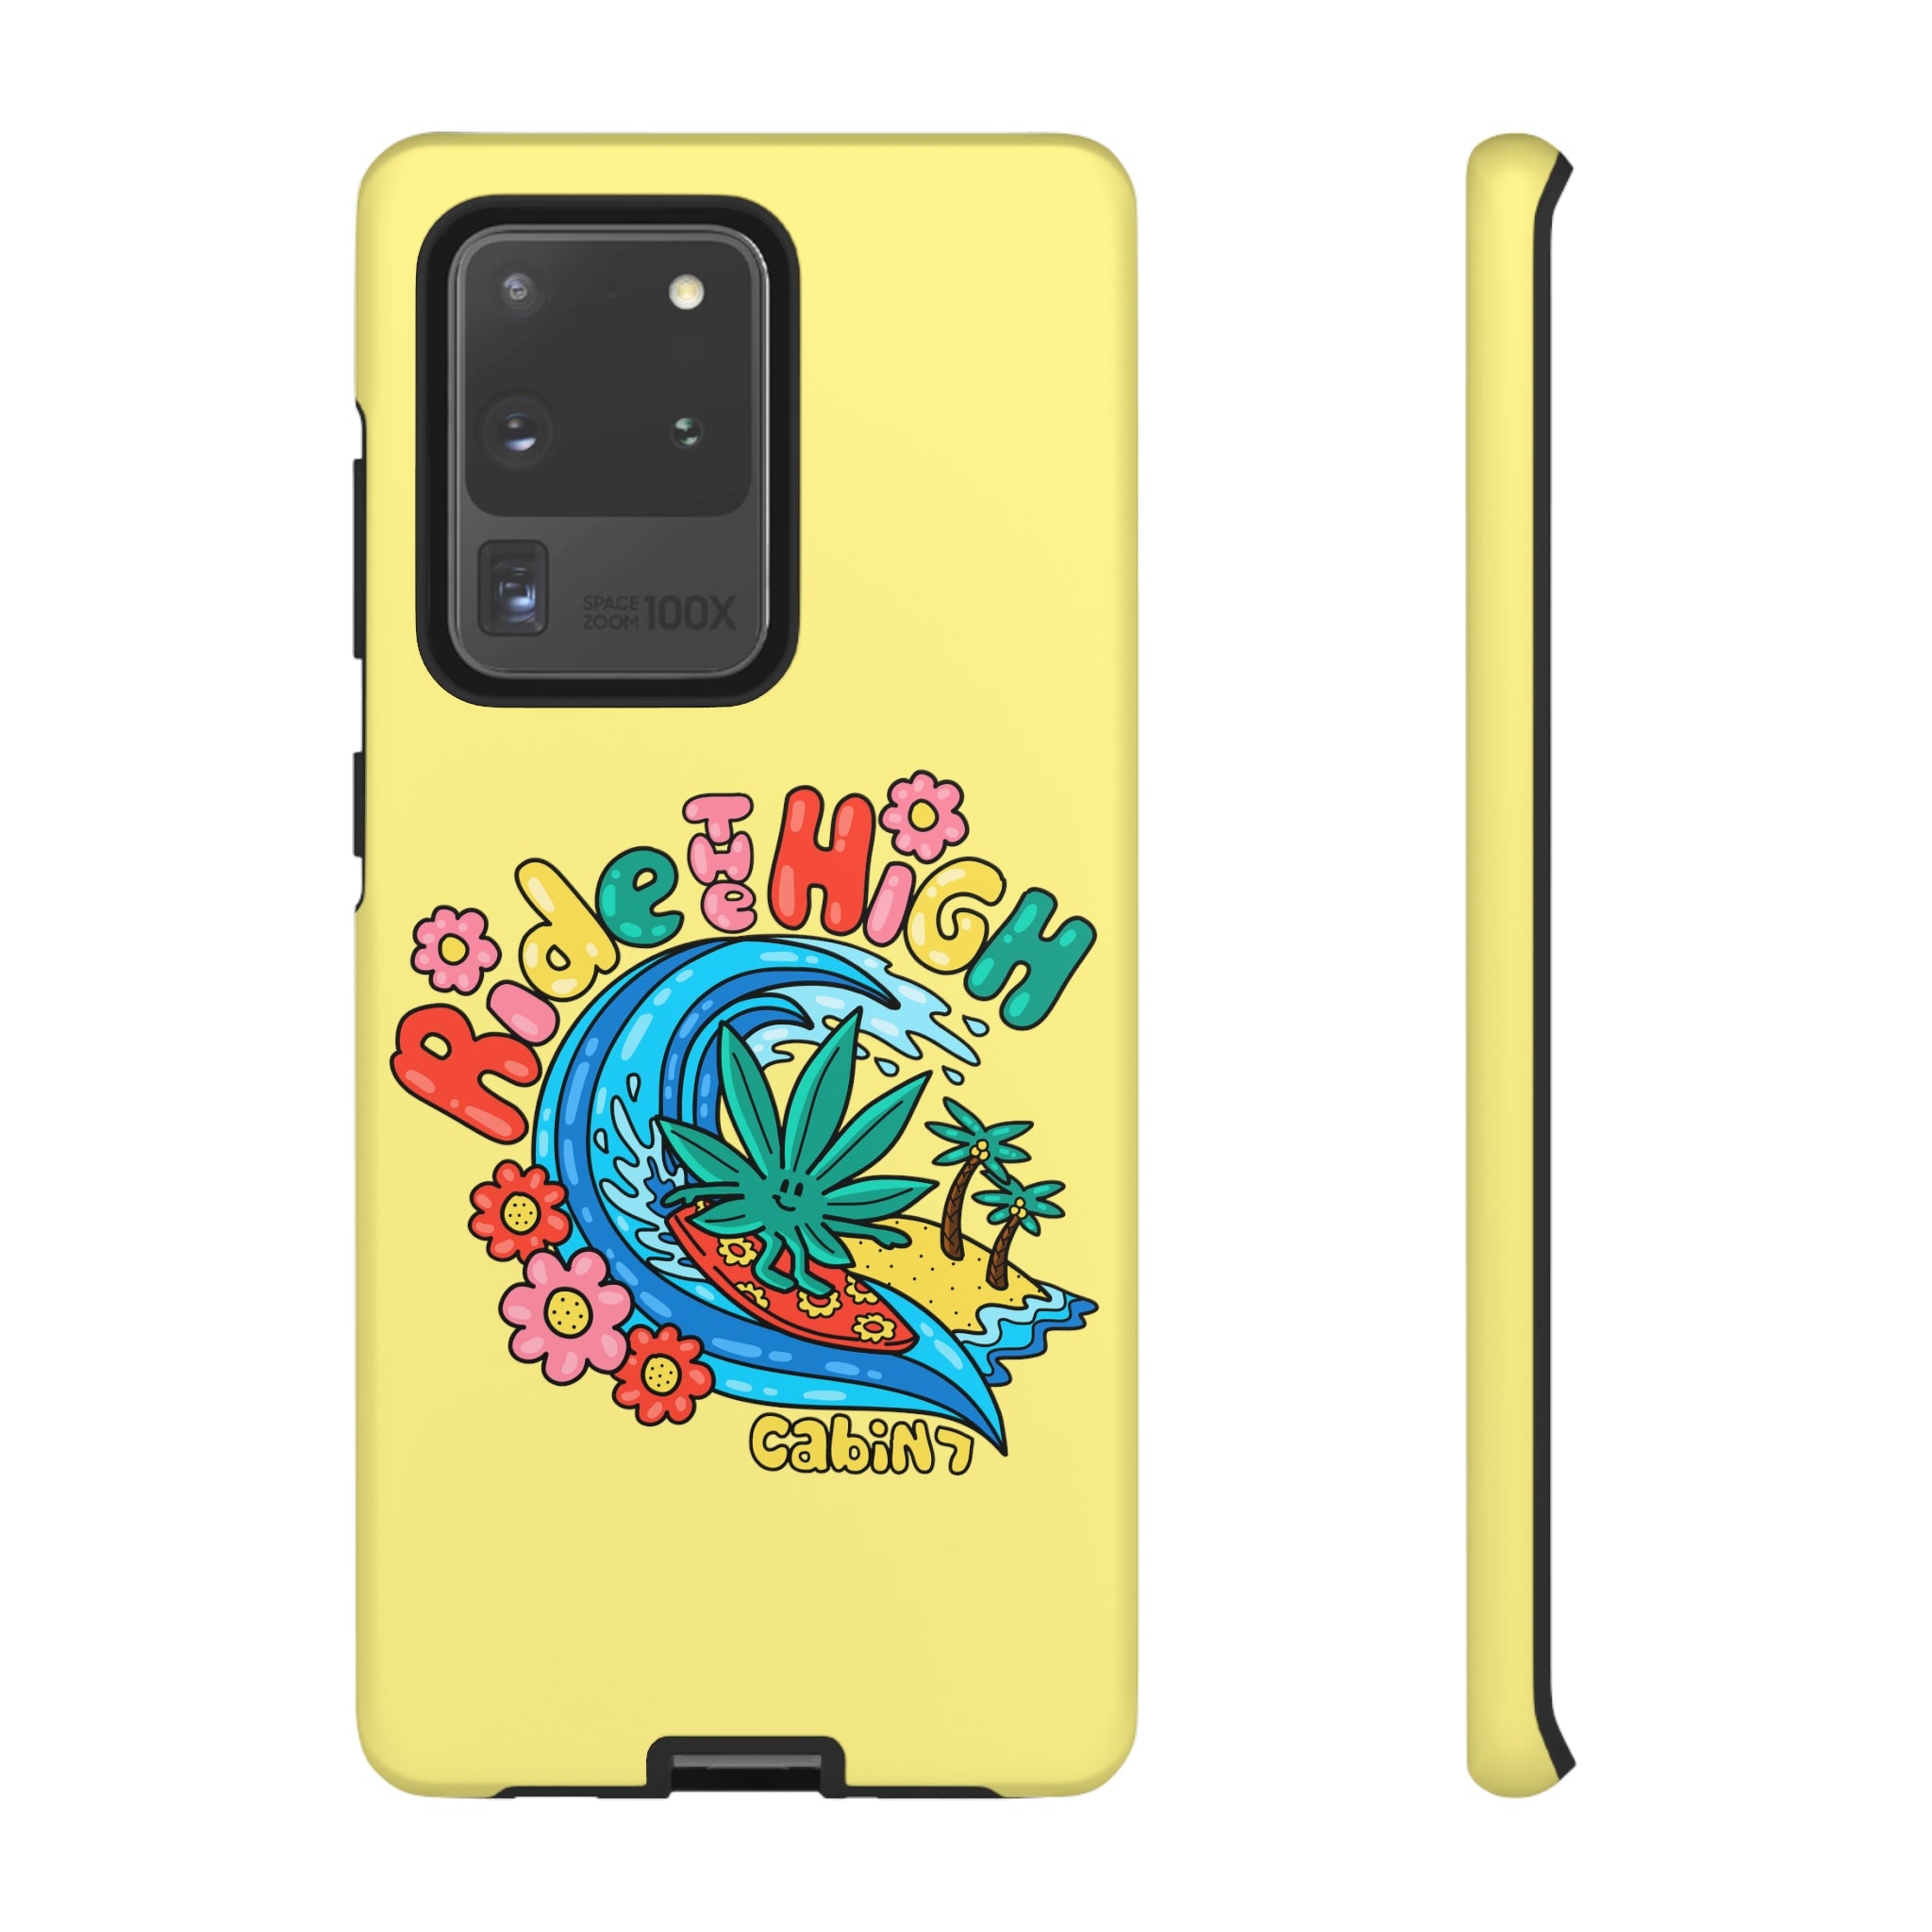 Ride The High Phone Case